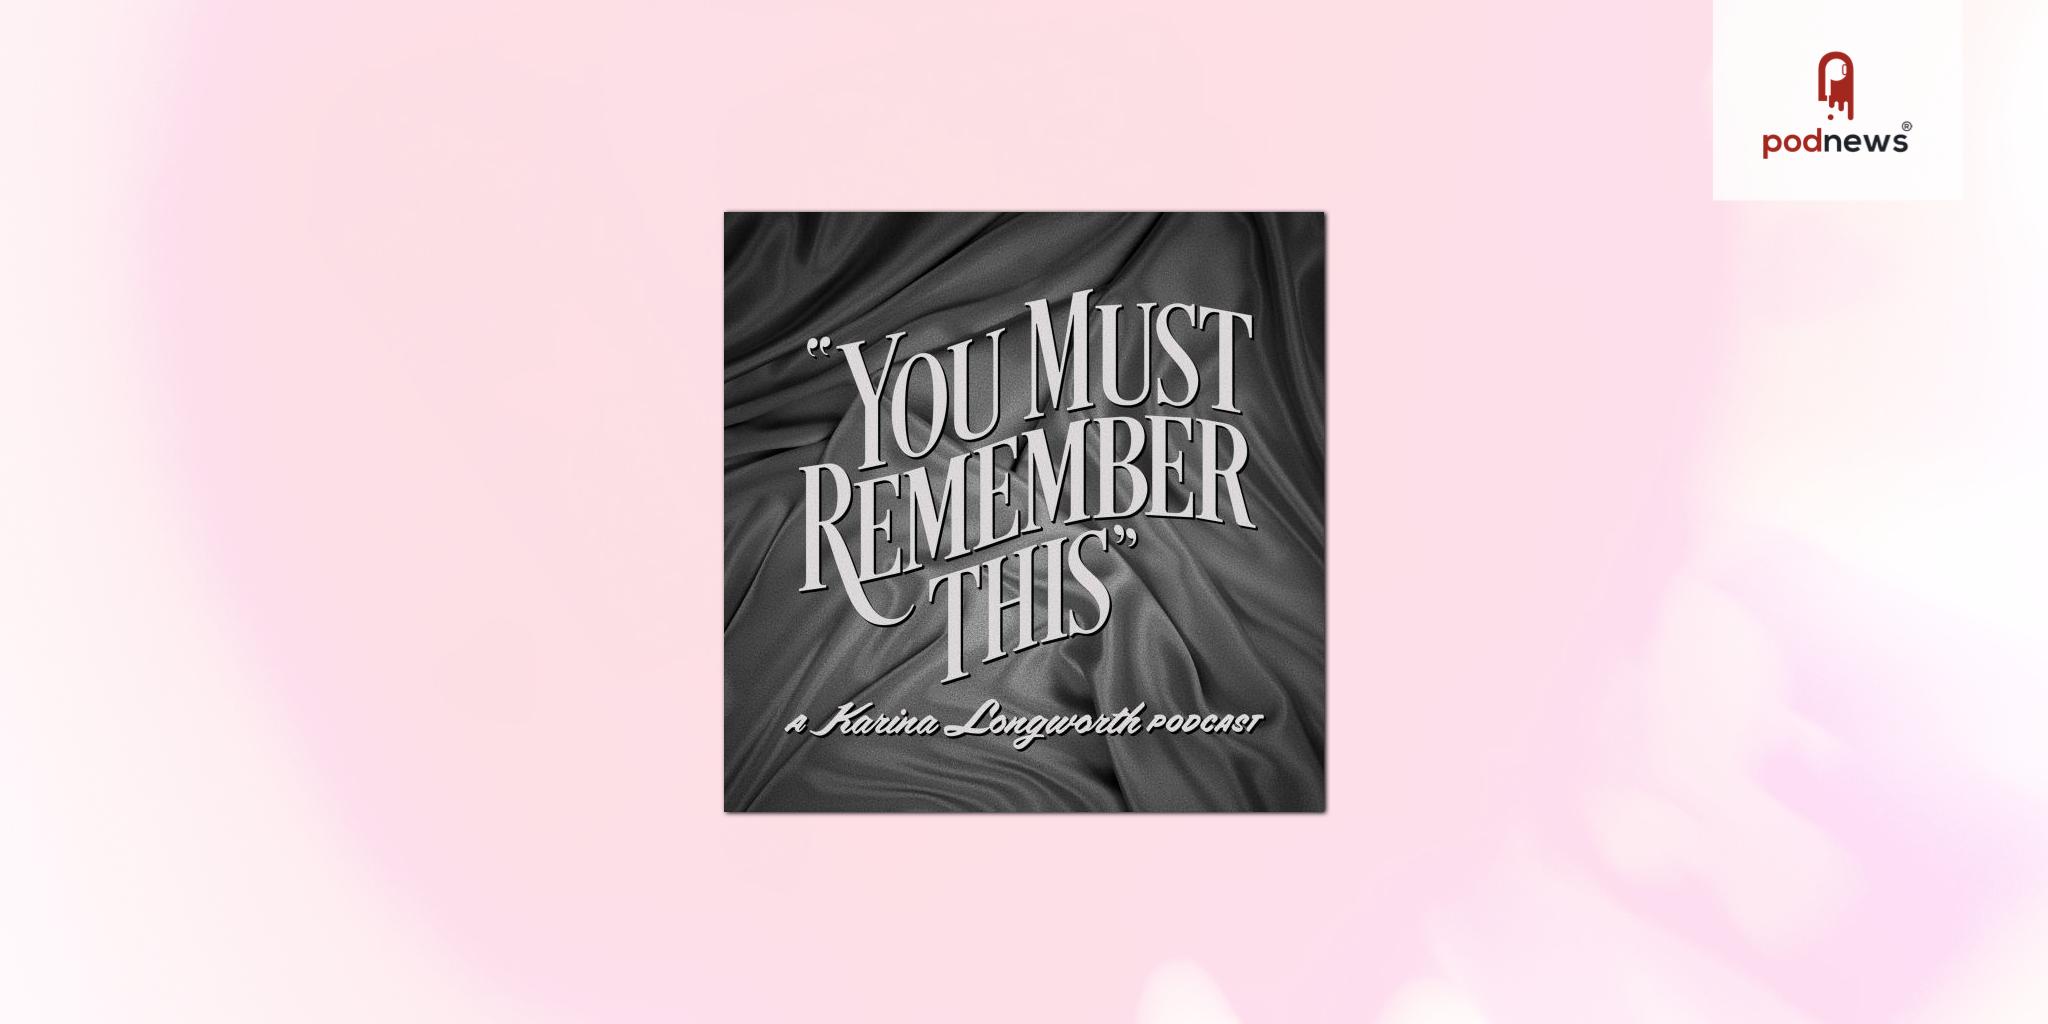 Award-Winning Hollywood Podcast “You Must Remember This” Returns for Extended New Season Premiering March 28